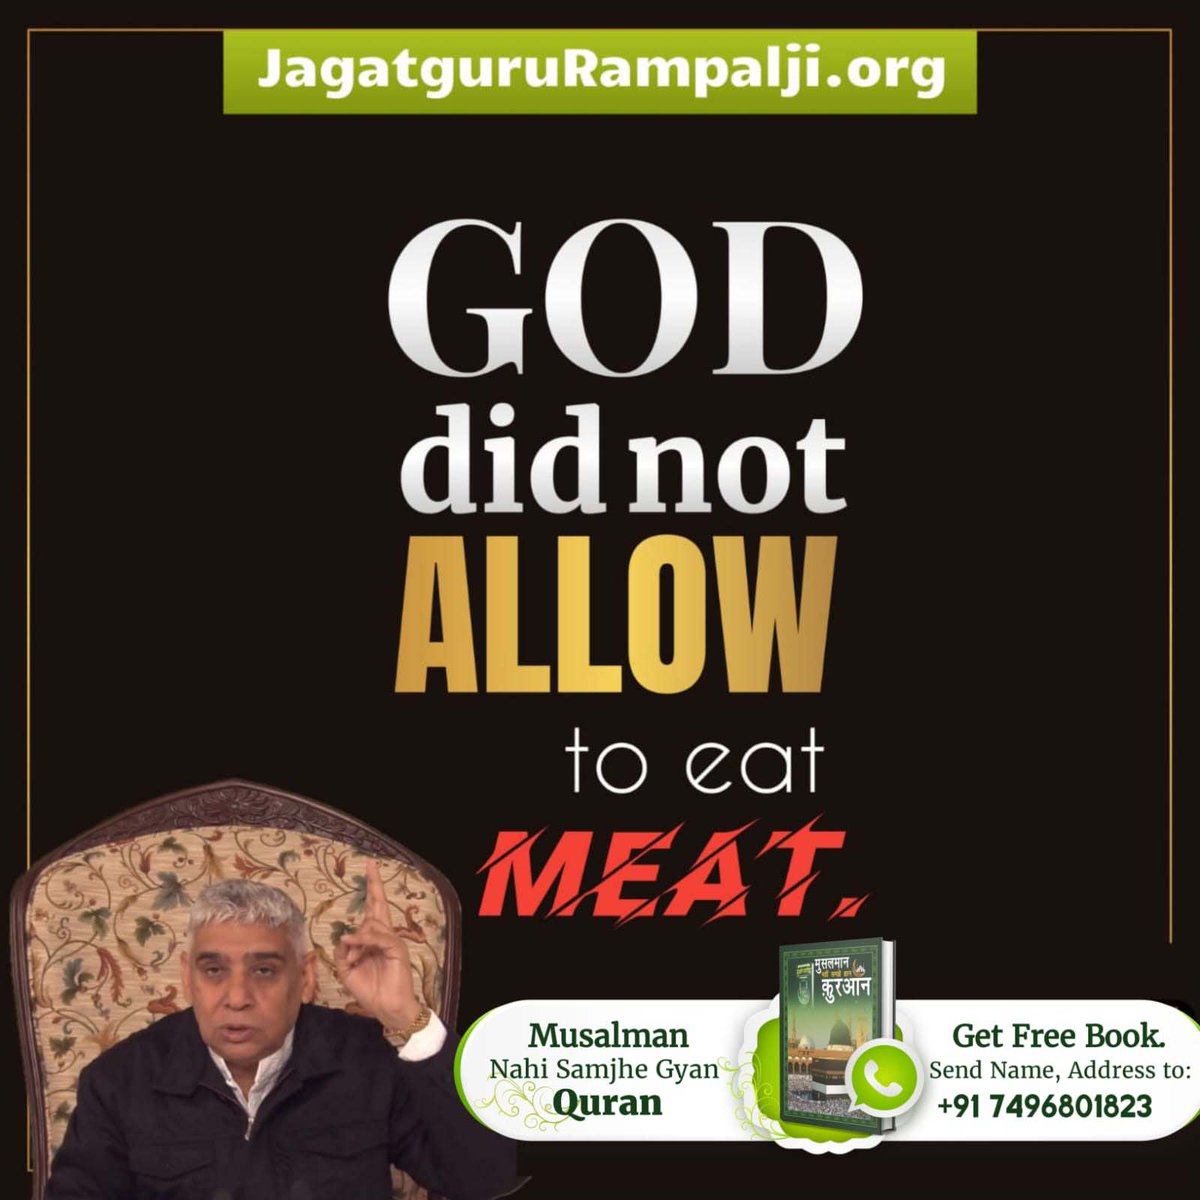 #रहम_करो_मूक_जीवों_पर

CONSUMING MEAT CANNOT LEAD TO SALVATION!
To know more visit santrampaljiMaharaj you tube channel